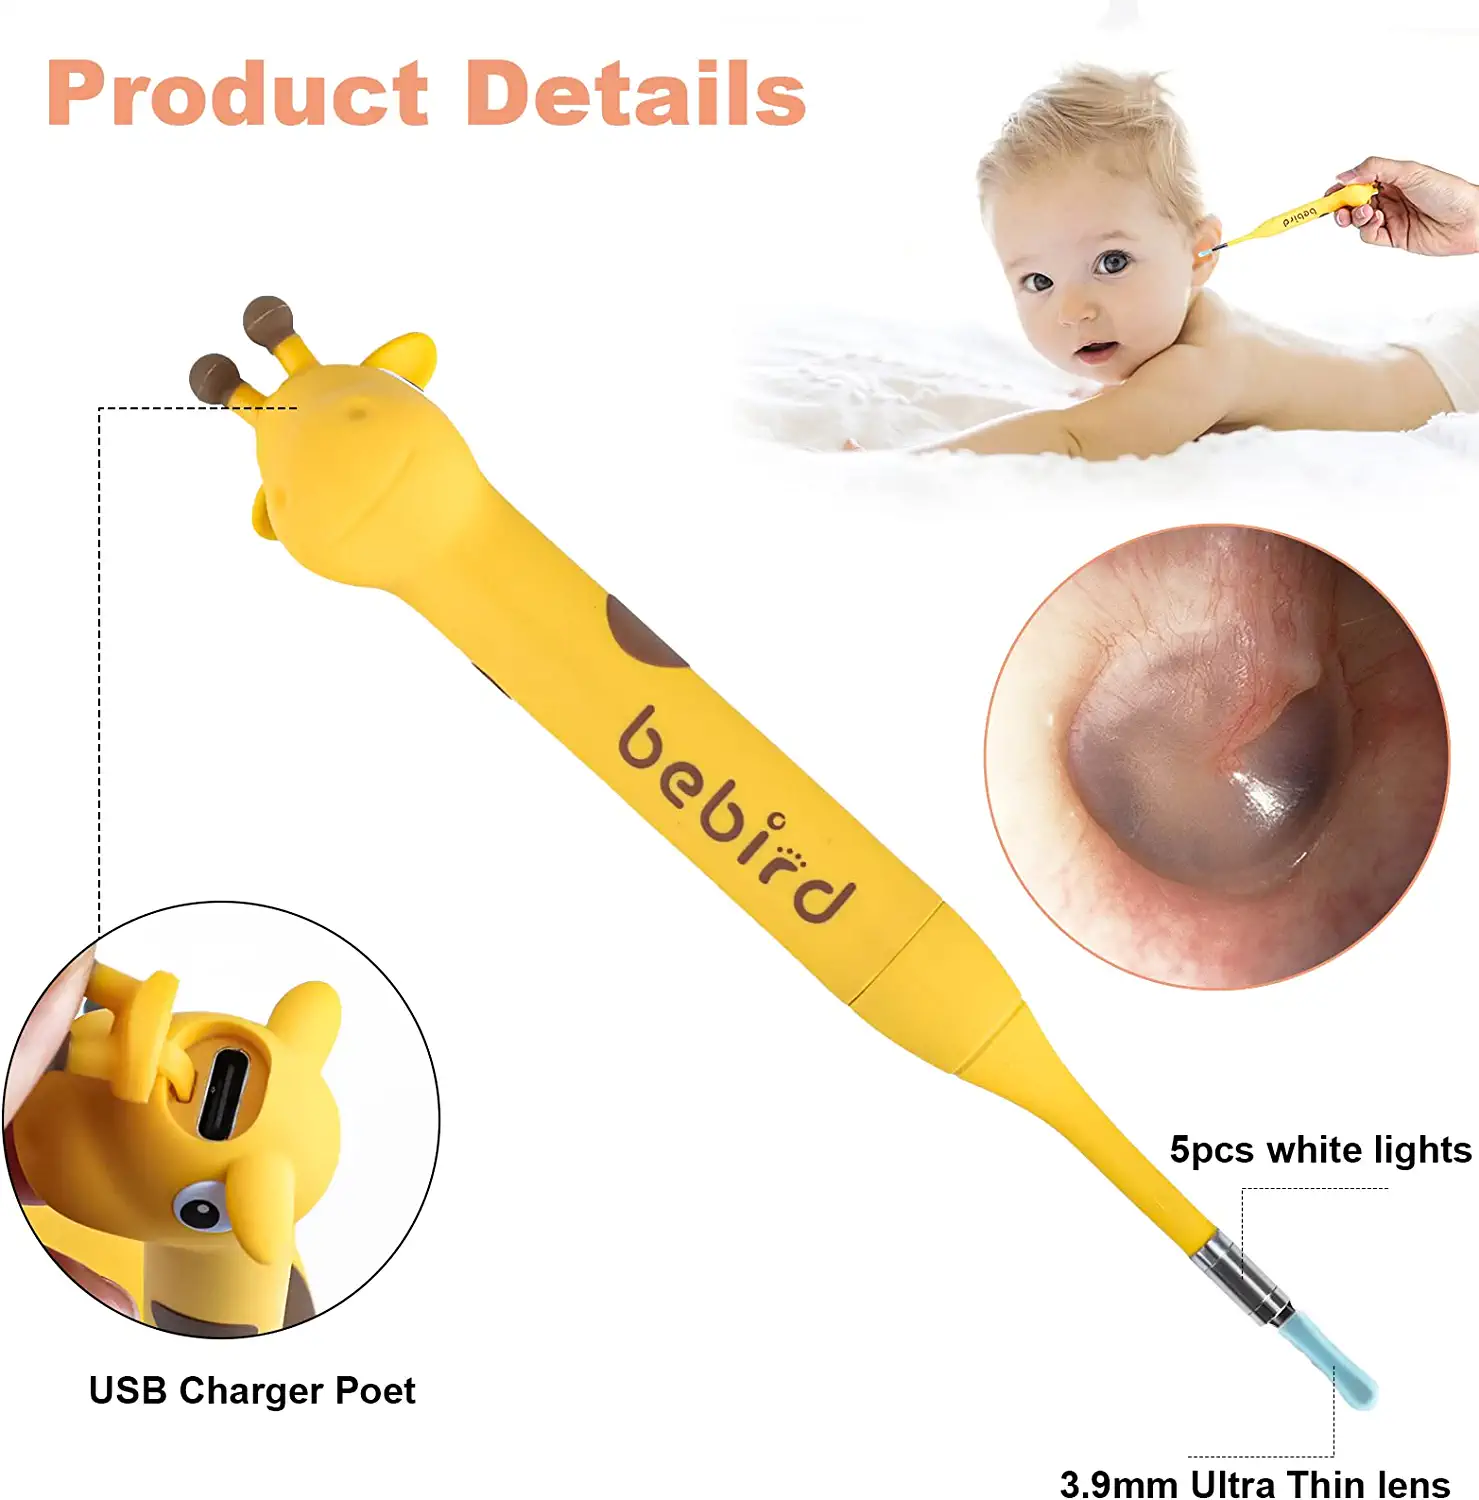 BEBIRD D3 Pro Smart Ear Wax Removal Otoscope Giraffe-Shaped, 1080p FHD Wireless Ear Wax Removal Tool Camera Bendable Lens Safety Lock for Kids, Ear Cleaner for All Family